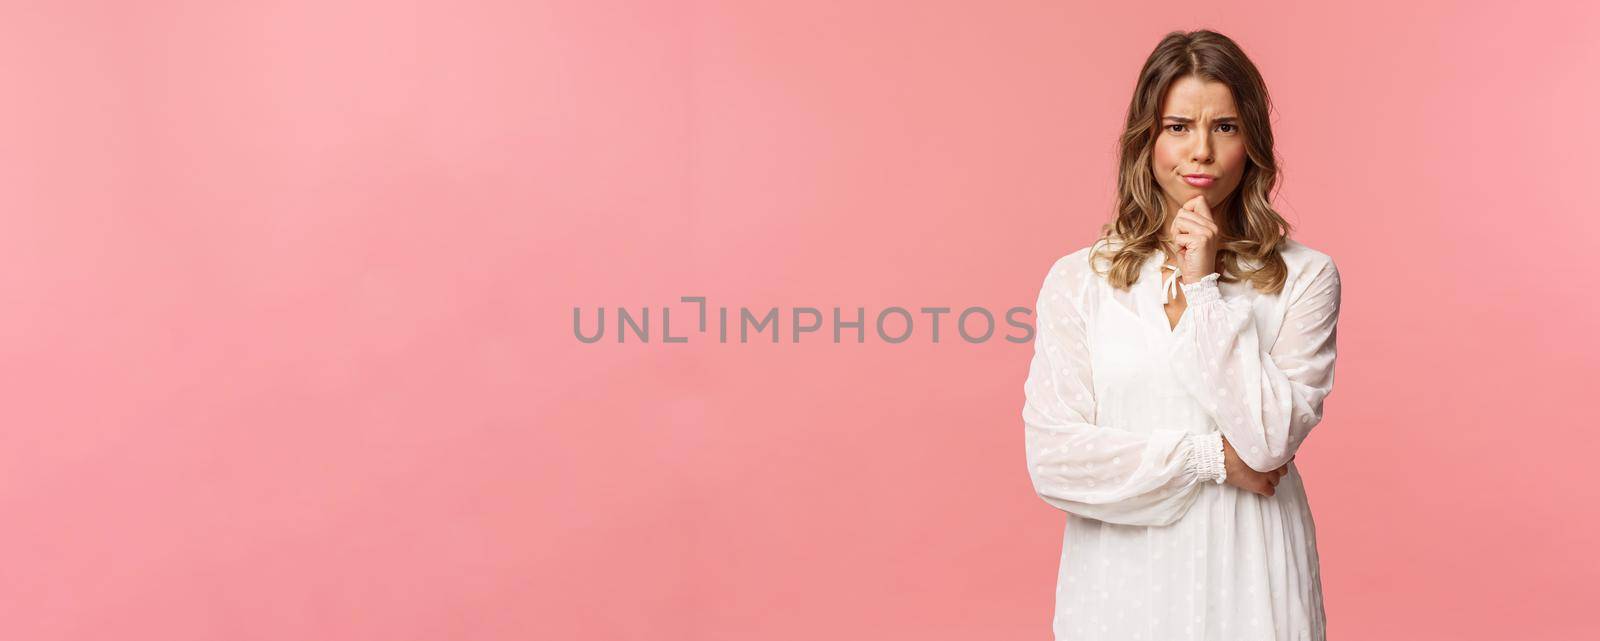 Beauty, fashion and women concept. Portrait of skeptical and judgemental serious-looking blond female in white spring dress, look disbelief, grimacing and frowning, pink background.